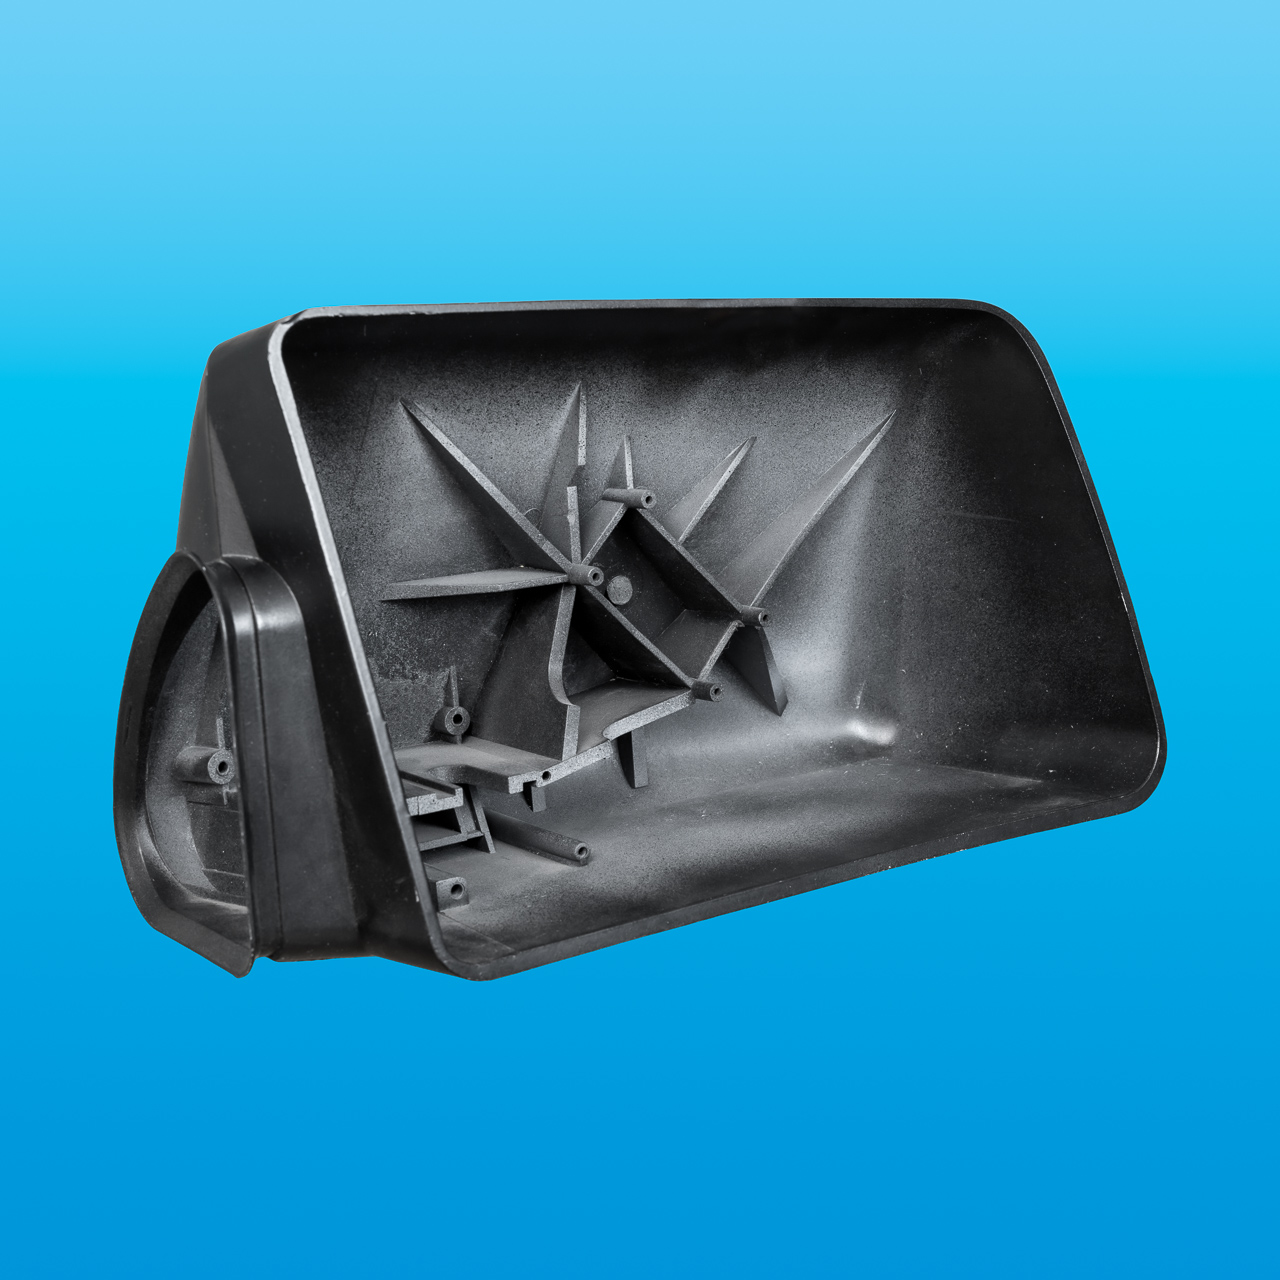 Plastic Injection Molded Polycarbonate Truck Mirror Housing for the Automotive Industry